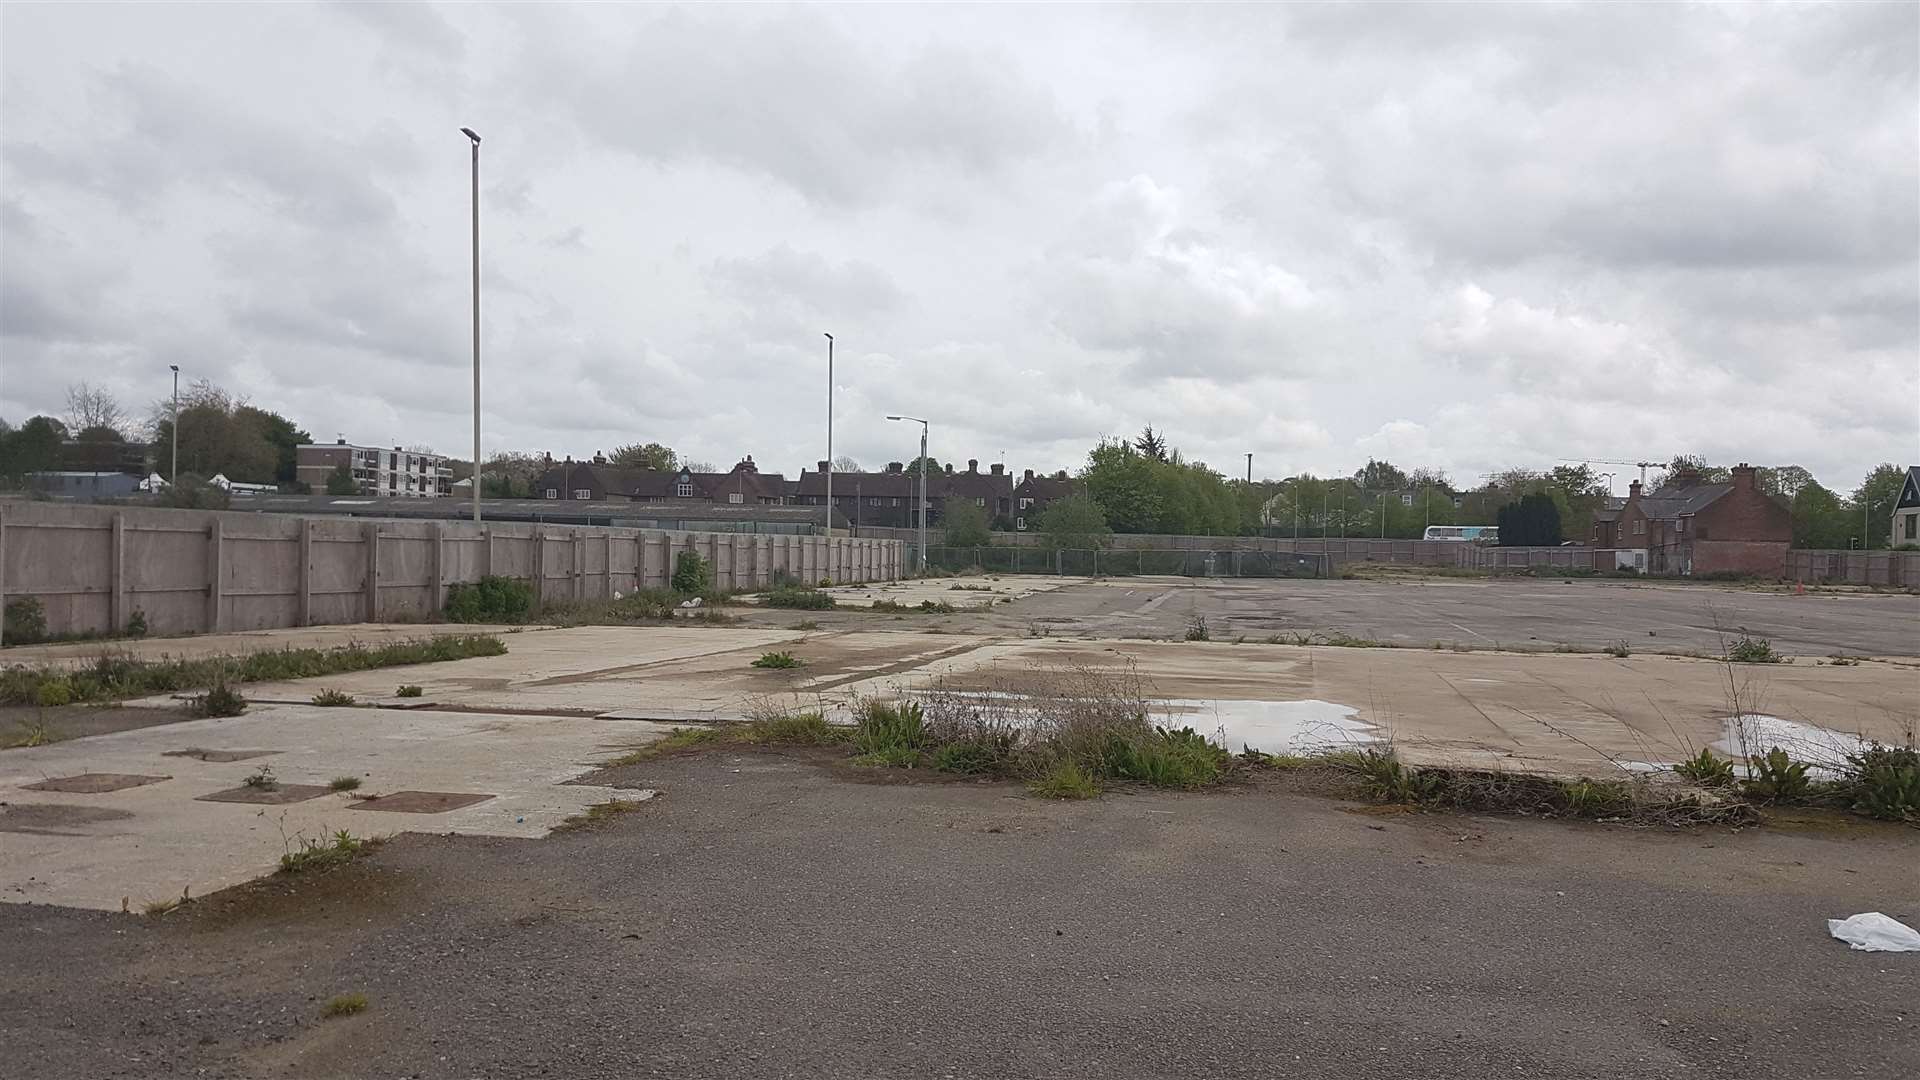 The current site at Kingsmead